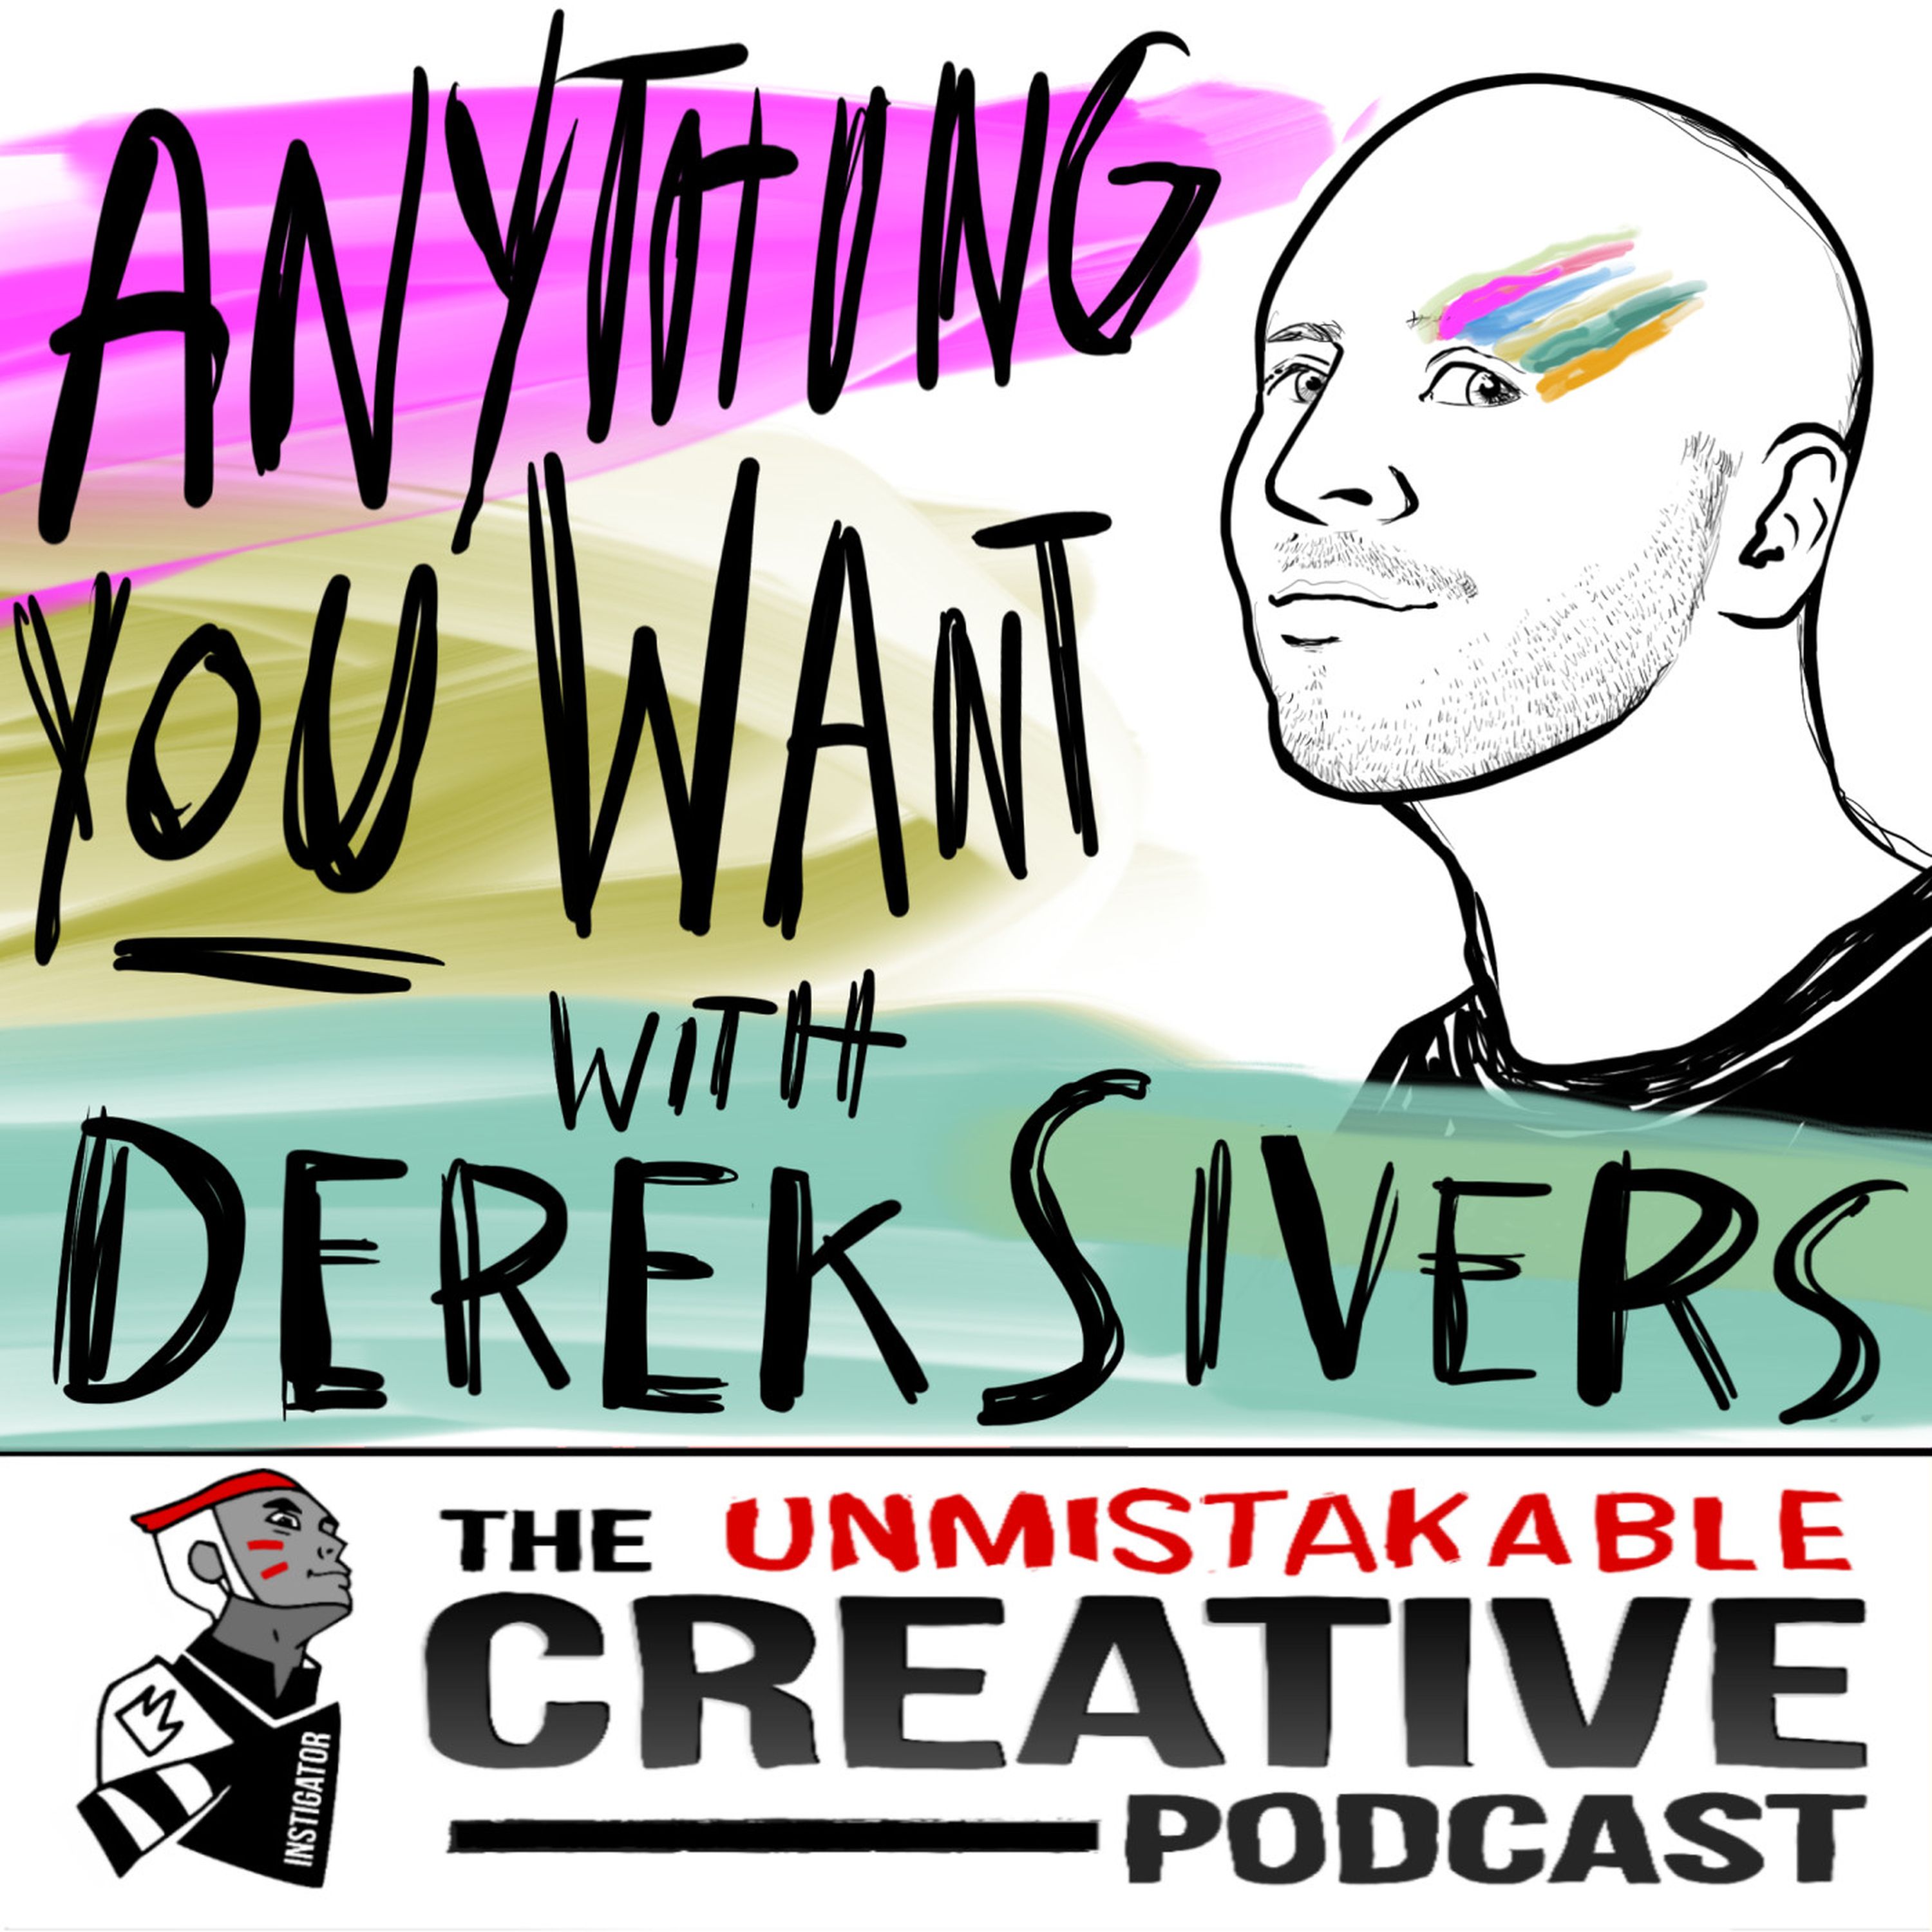 Anything You Want with Derek Sivers Image